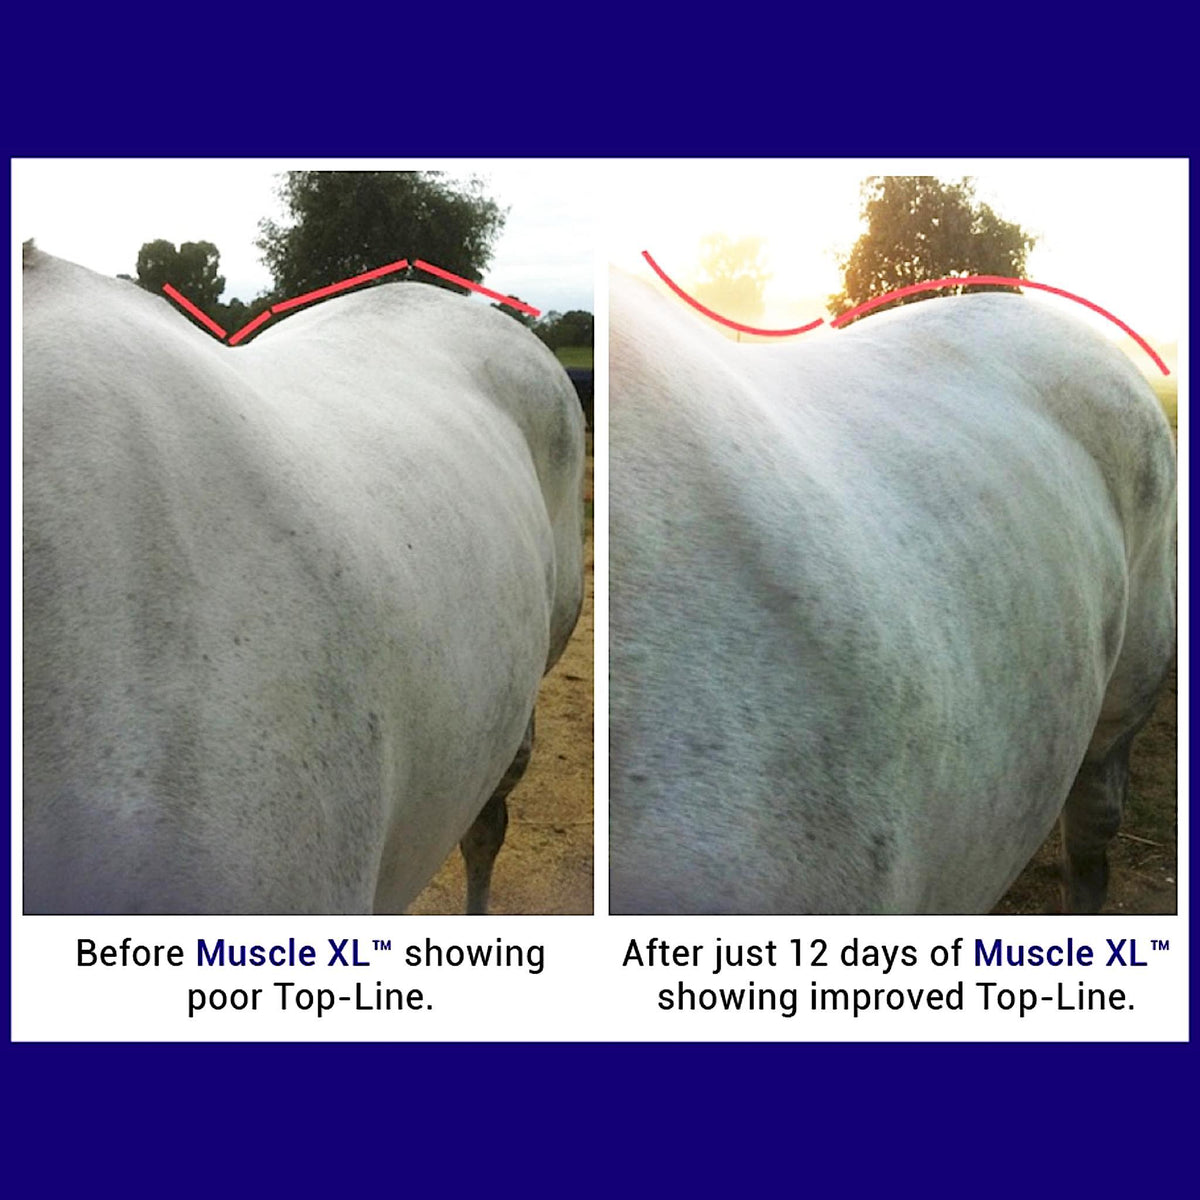 Before and after photos of horse&#39;s top-line prior and post the product.